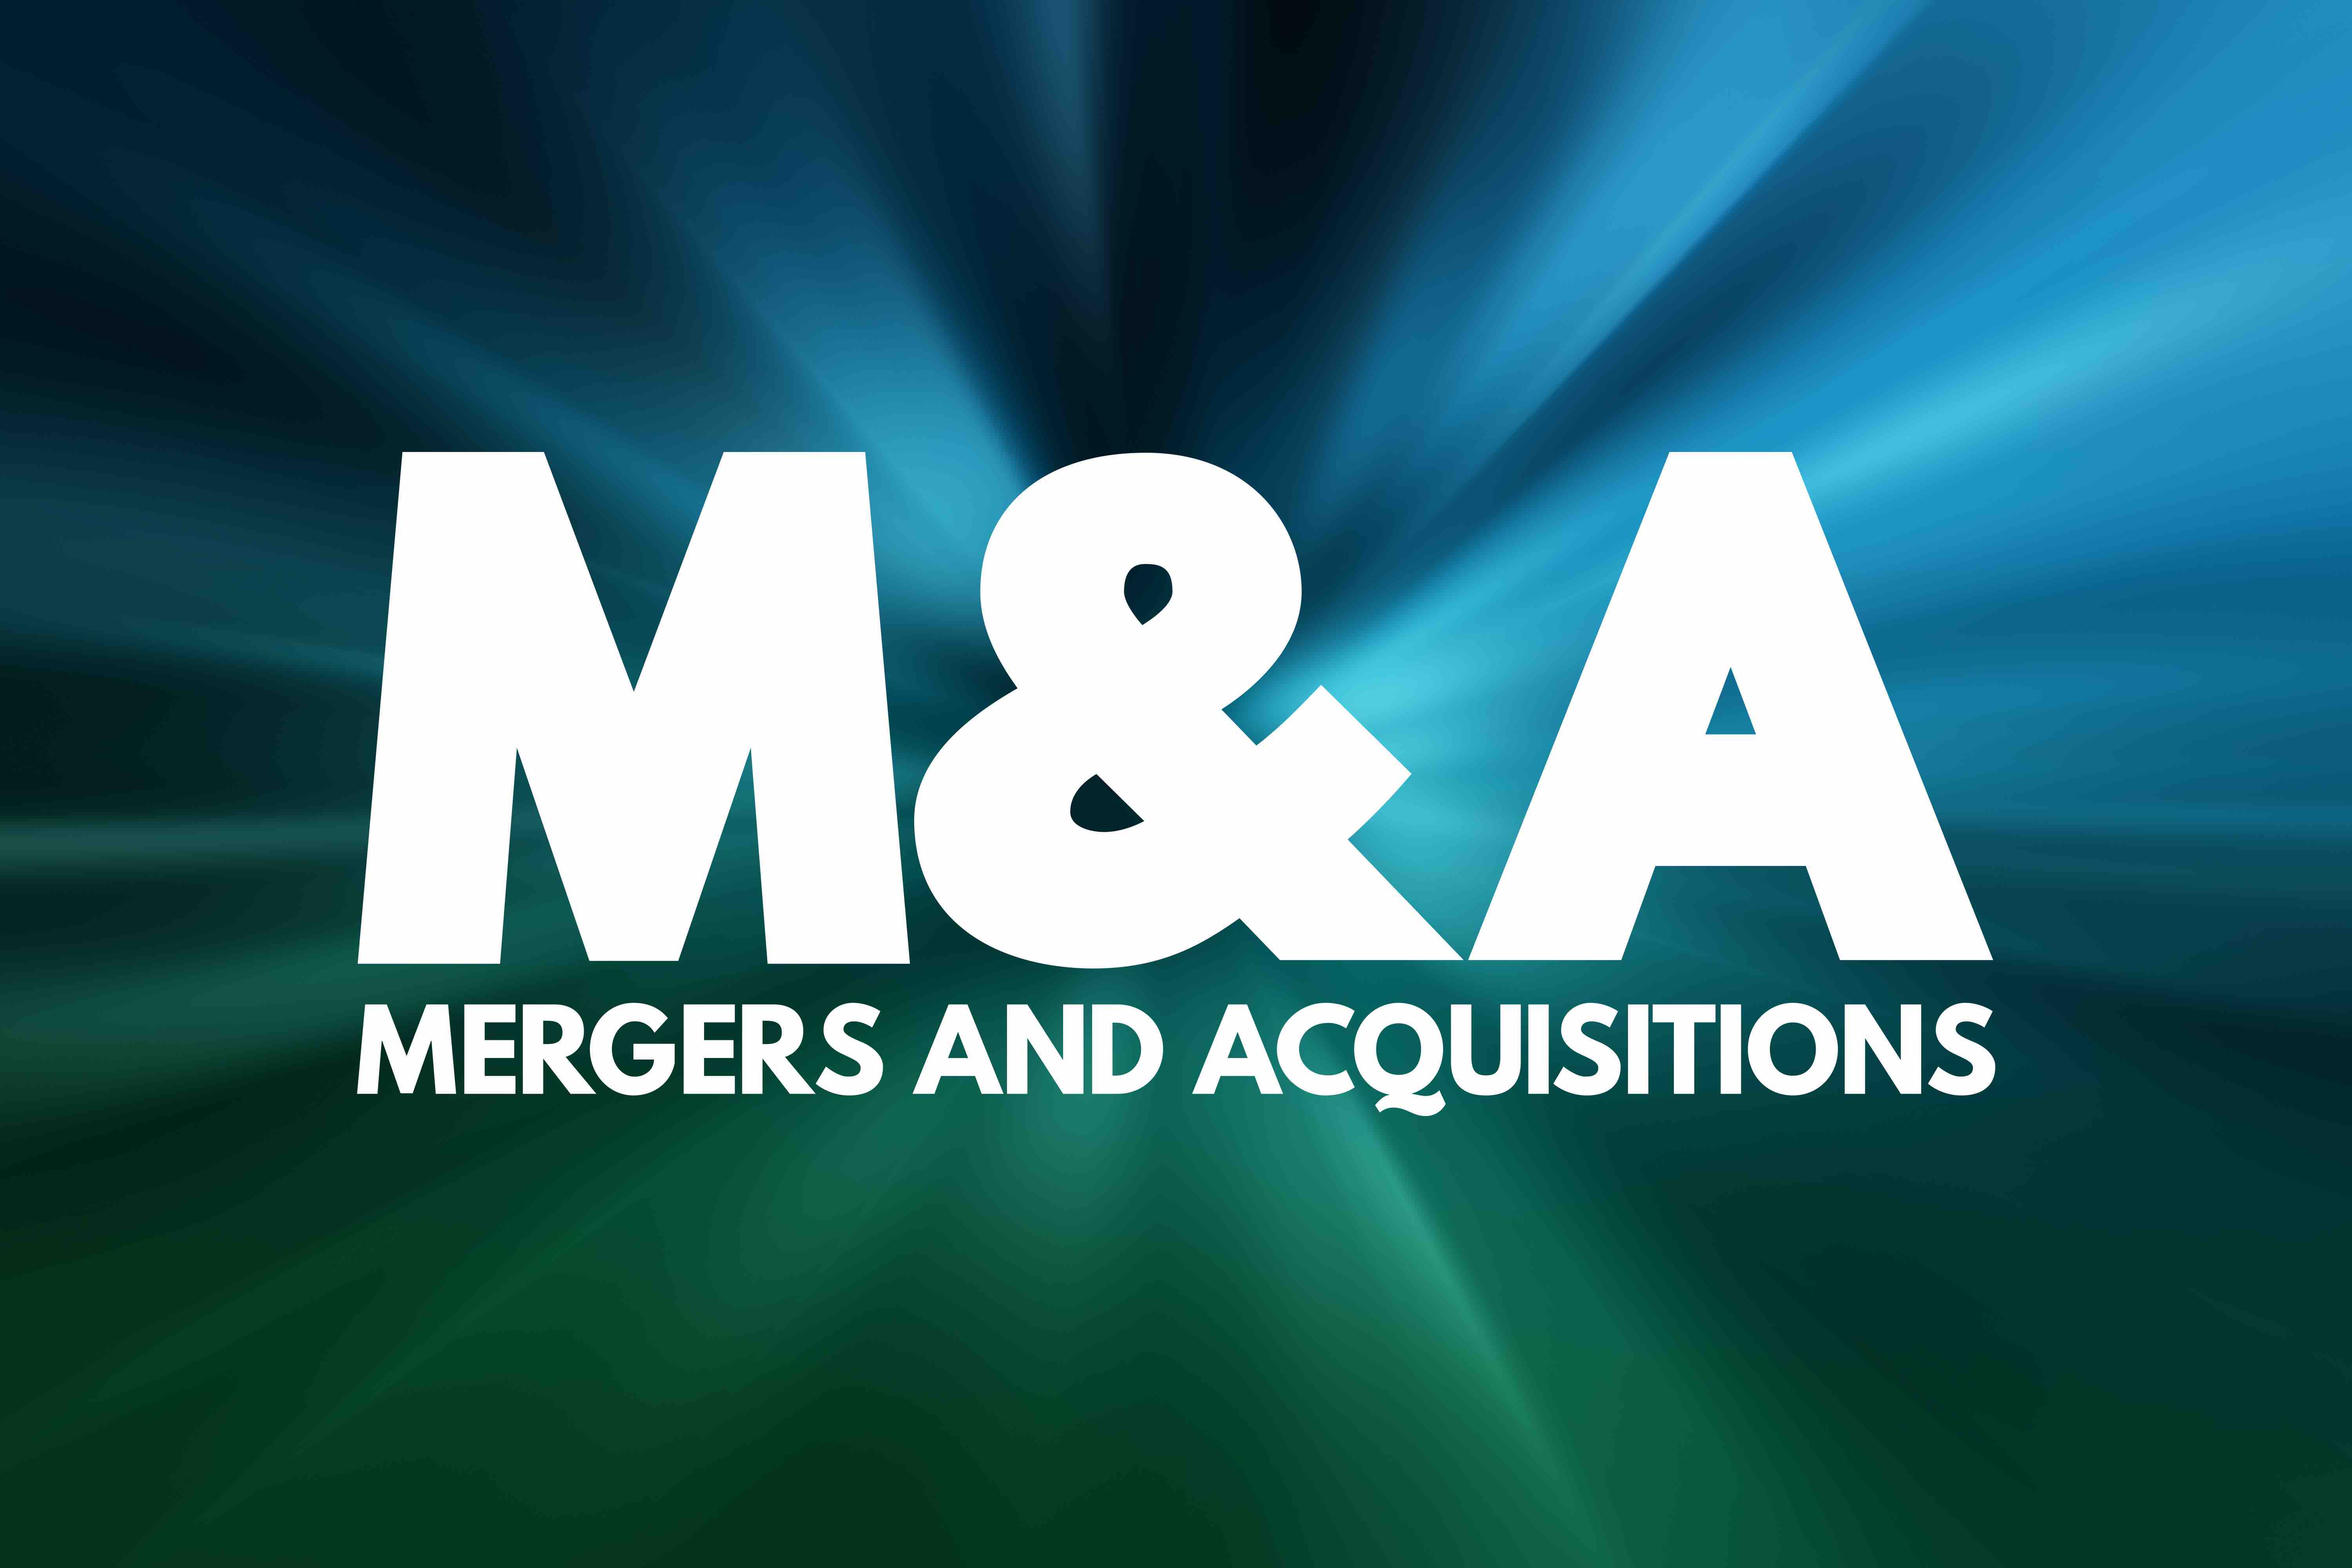 M&Aは「Mergers（合併）and Acquisitions（買収）」の略